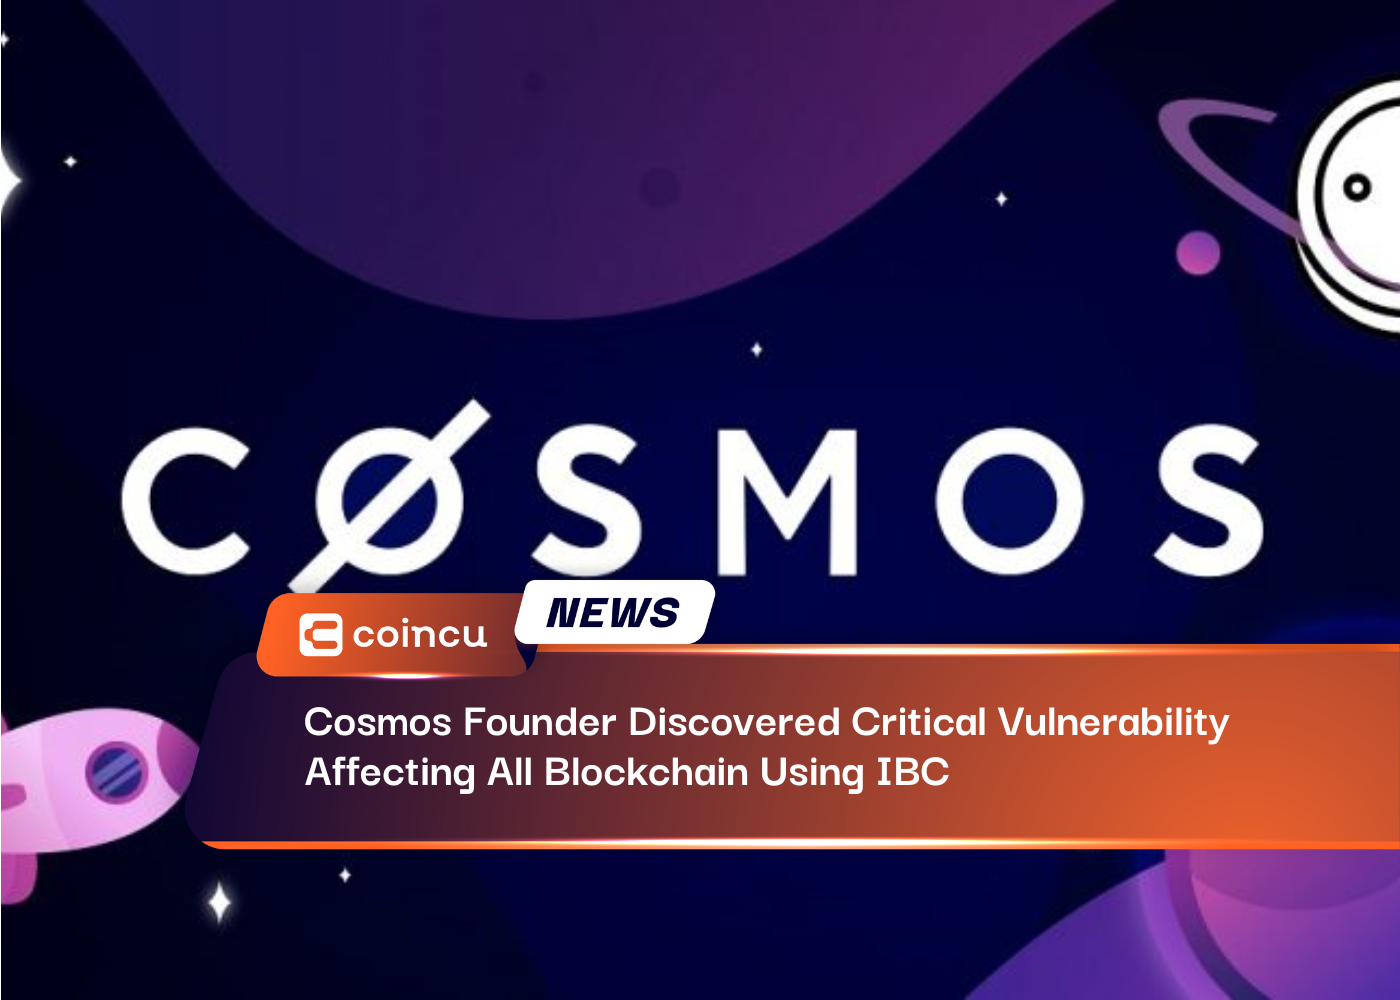 Cosmos Founder Discovered Critical Vulnerability Affecting All Blockchain Using IBC